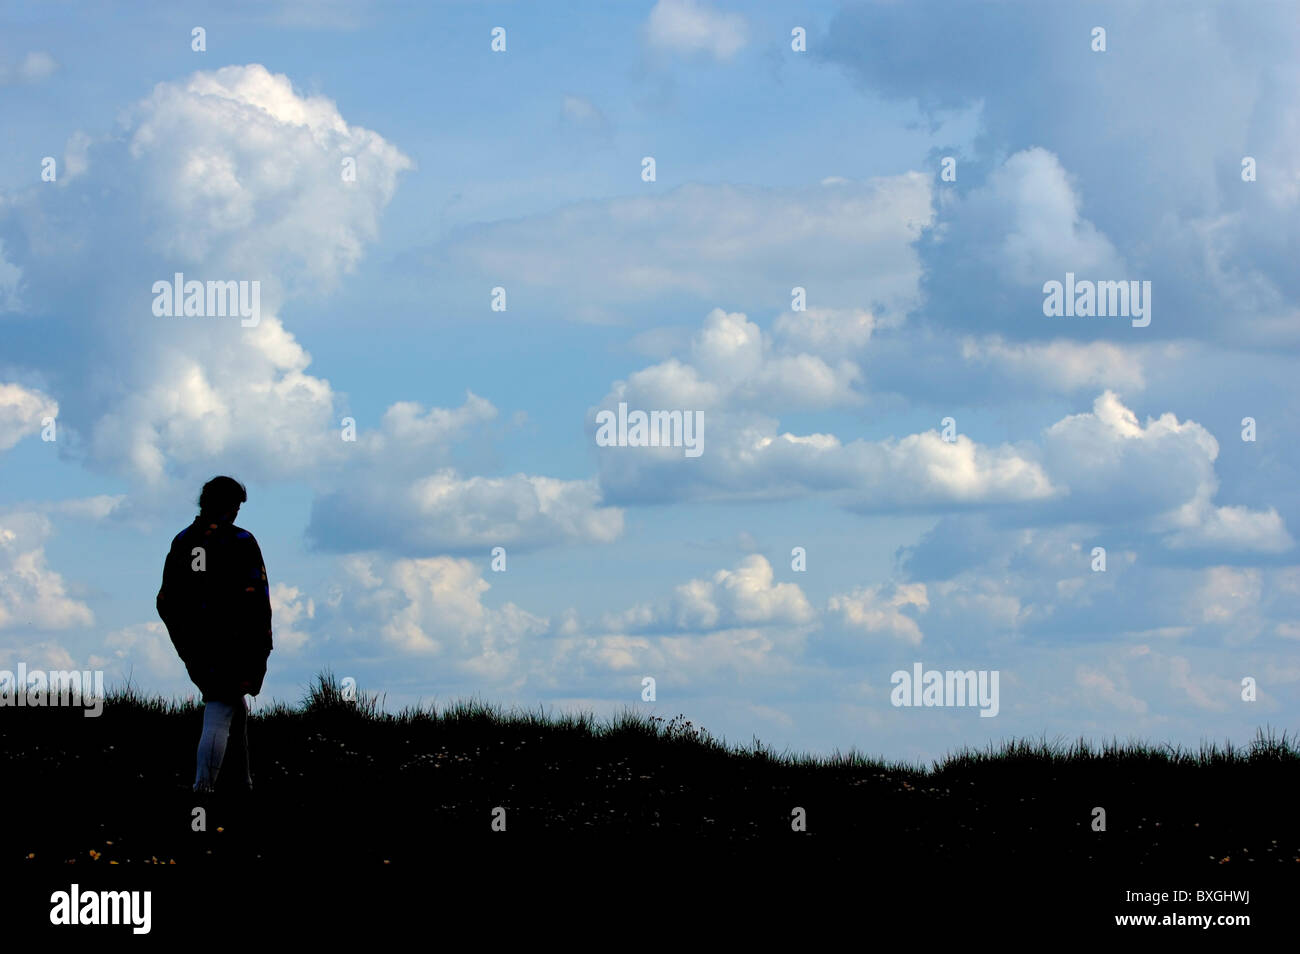 Silhouette of a lonely woman walking through countryside under a cloudy sky, France. Stock Photo